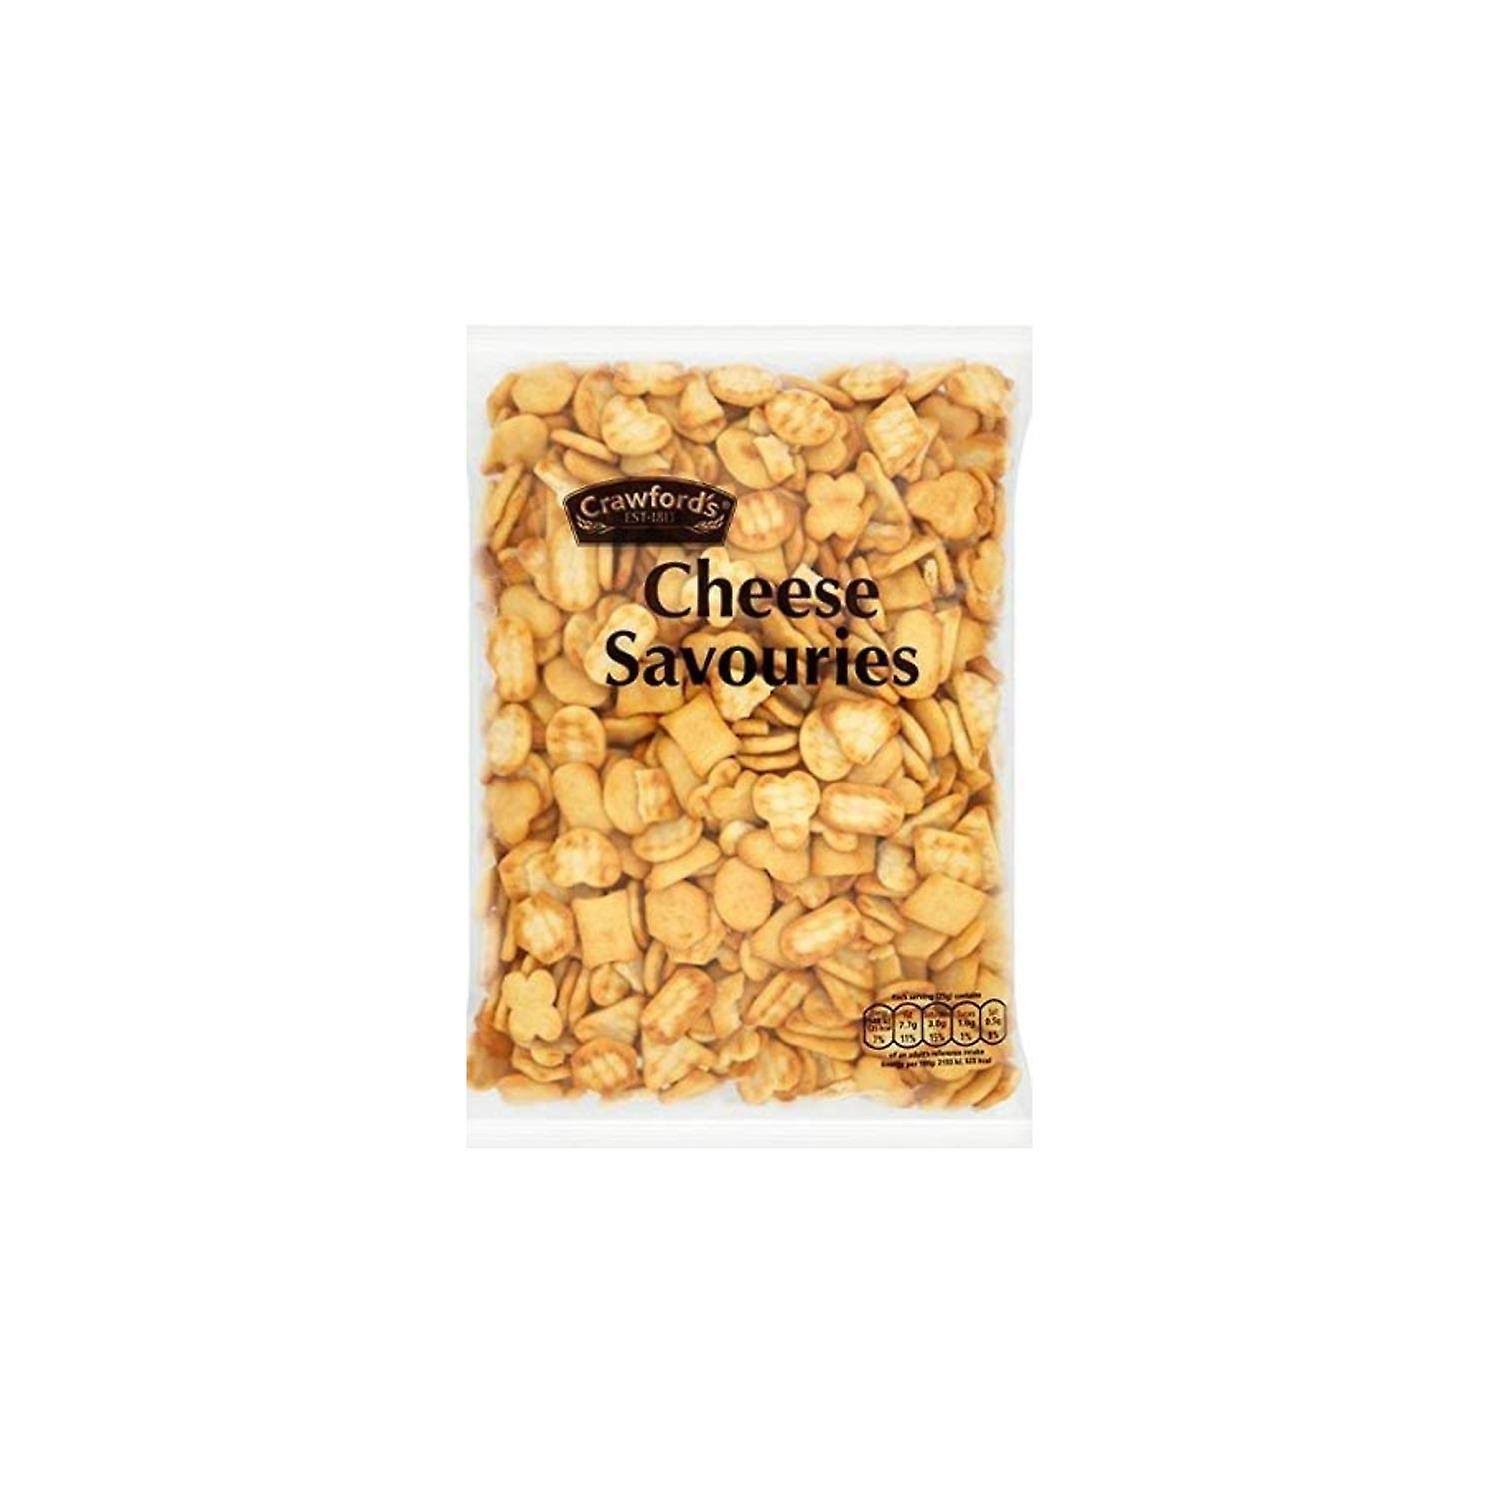 6 x Crawfords Cheese Savouries (300G) - Cheesy Snacks - Cheese nibbles